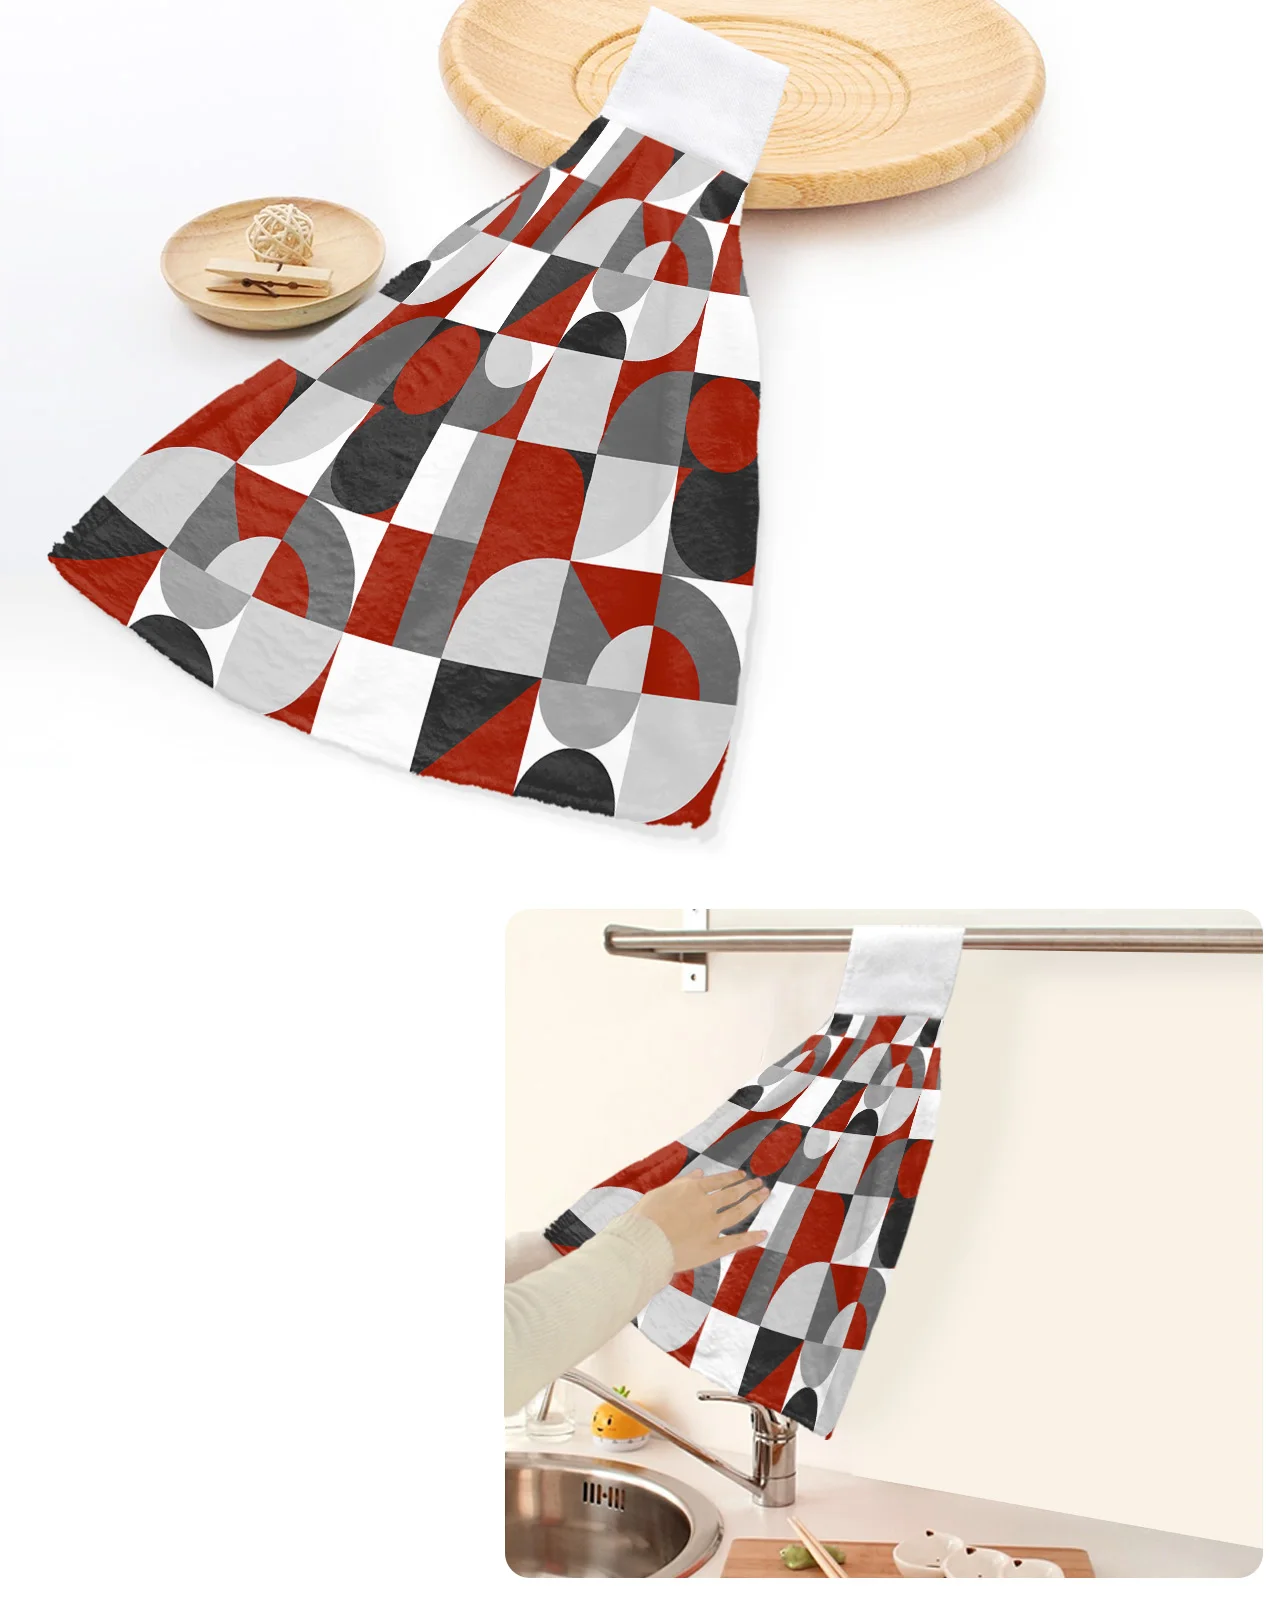 

Nordic Retro Medieval Geometric Abstract Color Hand Towels Home Kitchen Bathroom Hanging Dishcloths Absorbent Custom Wipe Towel